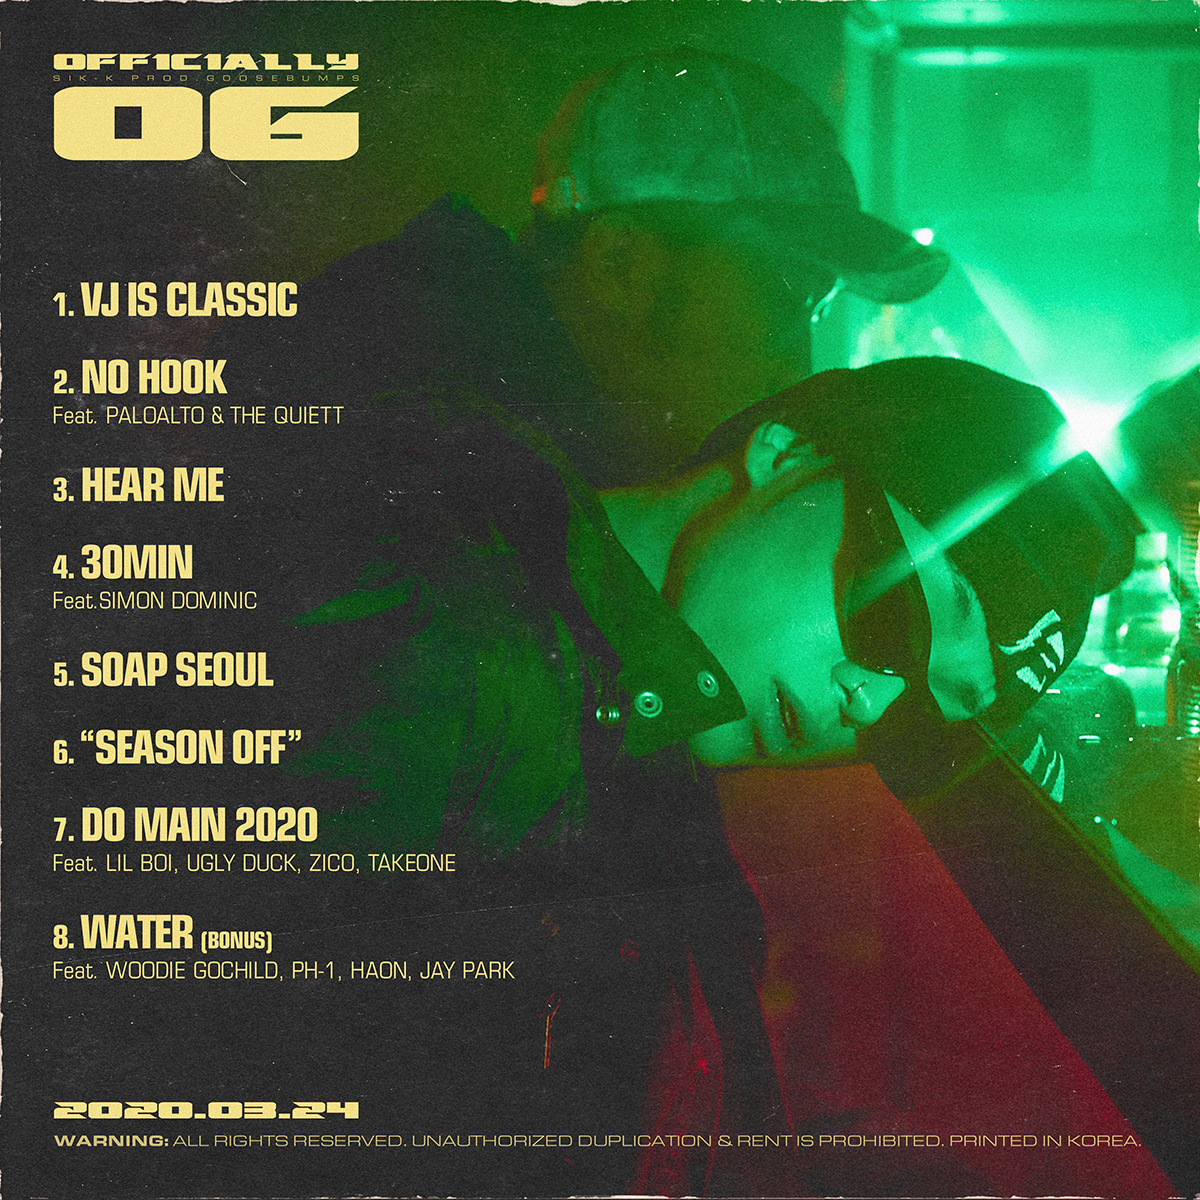 On the 18th, his agency Hier Music announced the new EP Officially OG track list of Sik-K through official SNS and officially announced the comeback of 24 Days.According to the public track list, the first track VJ IS CLASSIC (classic), as well as No Hook (NO HOOK) (Feat.Paloalto & The Quiett), I dont know (HEAR ME), 30 Minutes (30MIN) (Feat.Love, Simon Dominic), Soap Seoul (SOAP SEOUL), Season Off (SEASON OFF), Two Mains (DO MAIN 2020) (Feat.Bonus Tracks Water (WATER) (Feat) on Lil Boi, Ugly Duck, ZICO, TakeOne.Woodie Gochild, pH-1, HAON, Jay Park) included a total of eight songs.The album was named Officially Ozzie, and a total of 12 famous The Artists, including Paloalto, The Quiet, VerbalJint, Love, Simon Dominic, and Zico (ZICO), participated in the album to enhance the perfection.Here, producer GooseBumps, who has worked with numerous hip-hop The Artists, produces the former Tracks, drawing more anticipation.Sik-K, who led hip-hop fans hot reaction with the collabor EP album S.O.S with rapper Coogie in September last year, is expected to capture listeners with more intense and high quality music.Sik-Ks new EP Official Oji will be released on various music sites at 6 pm on the 24th.